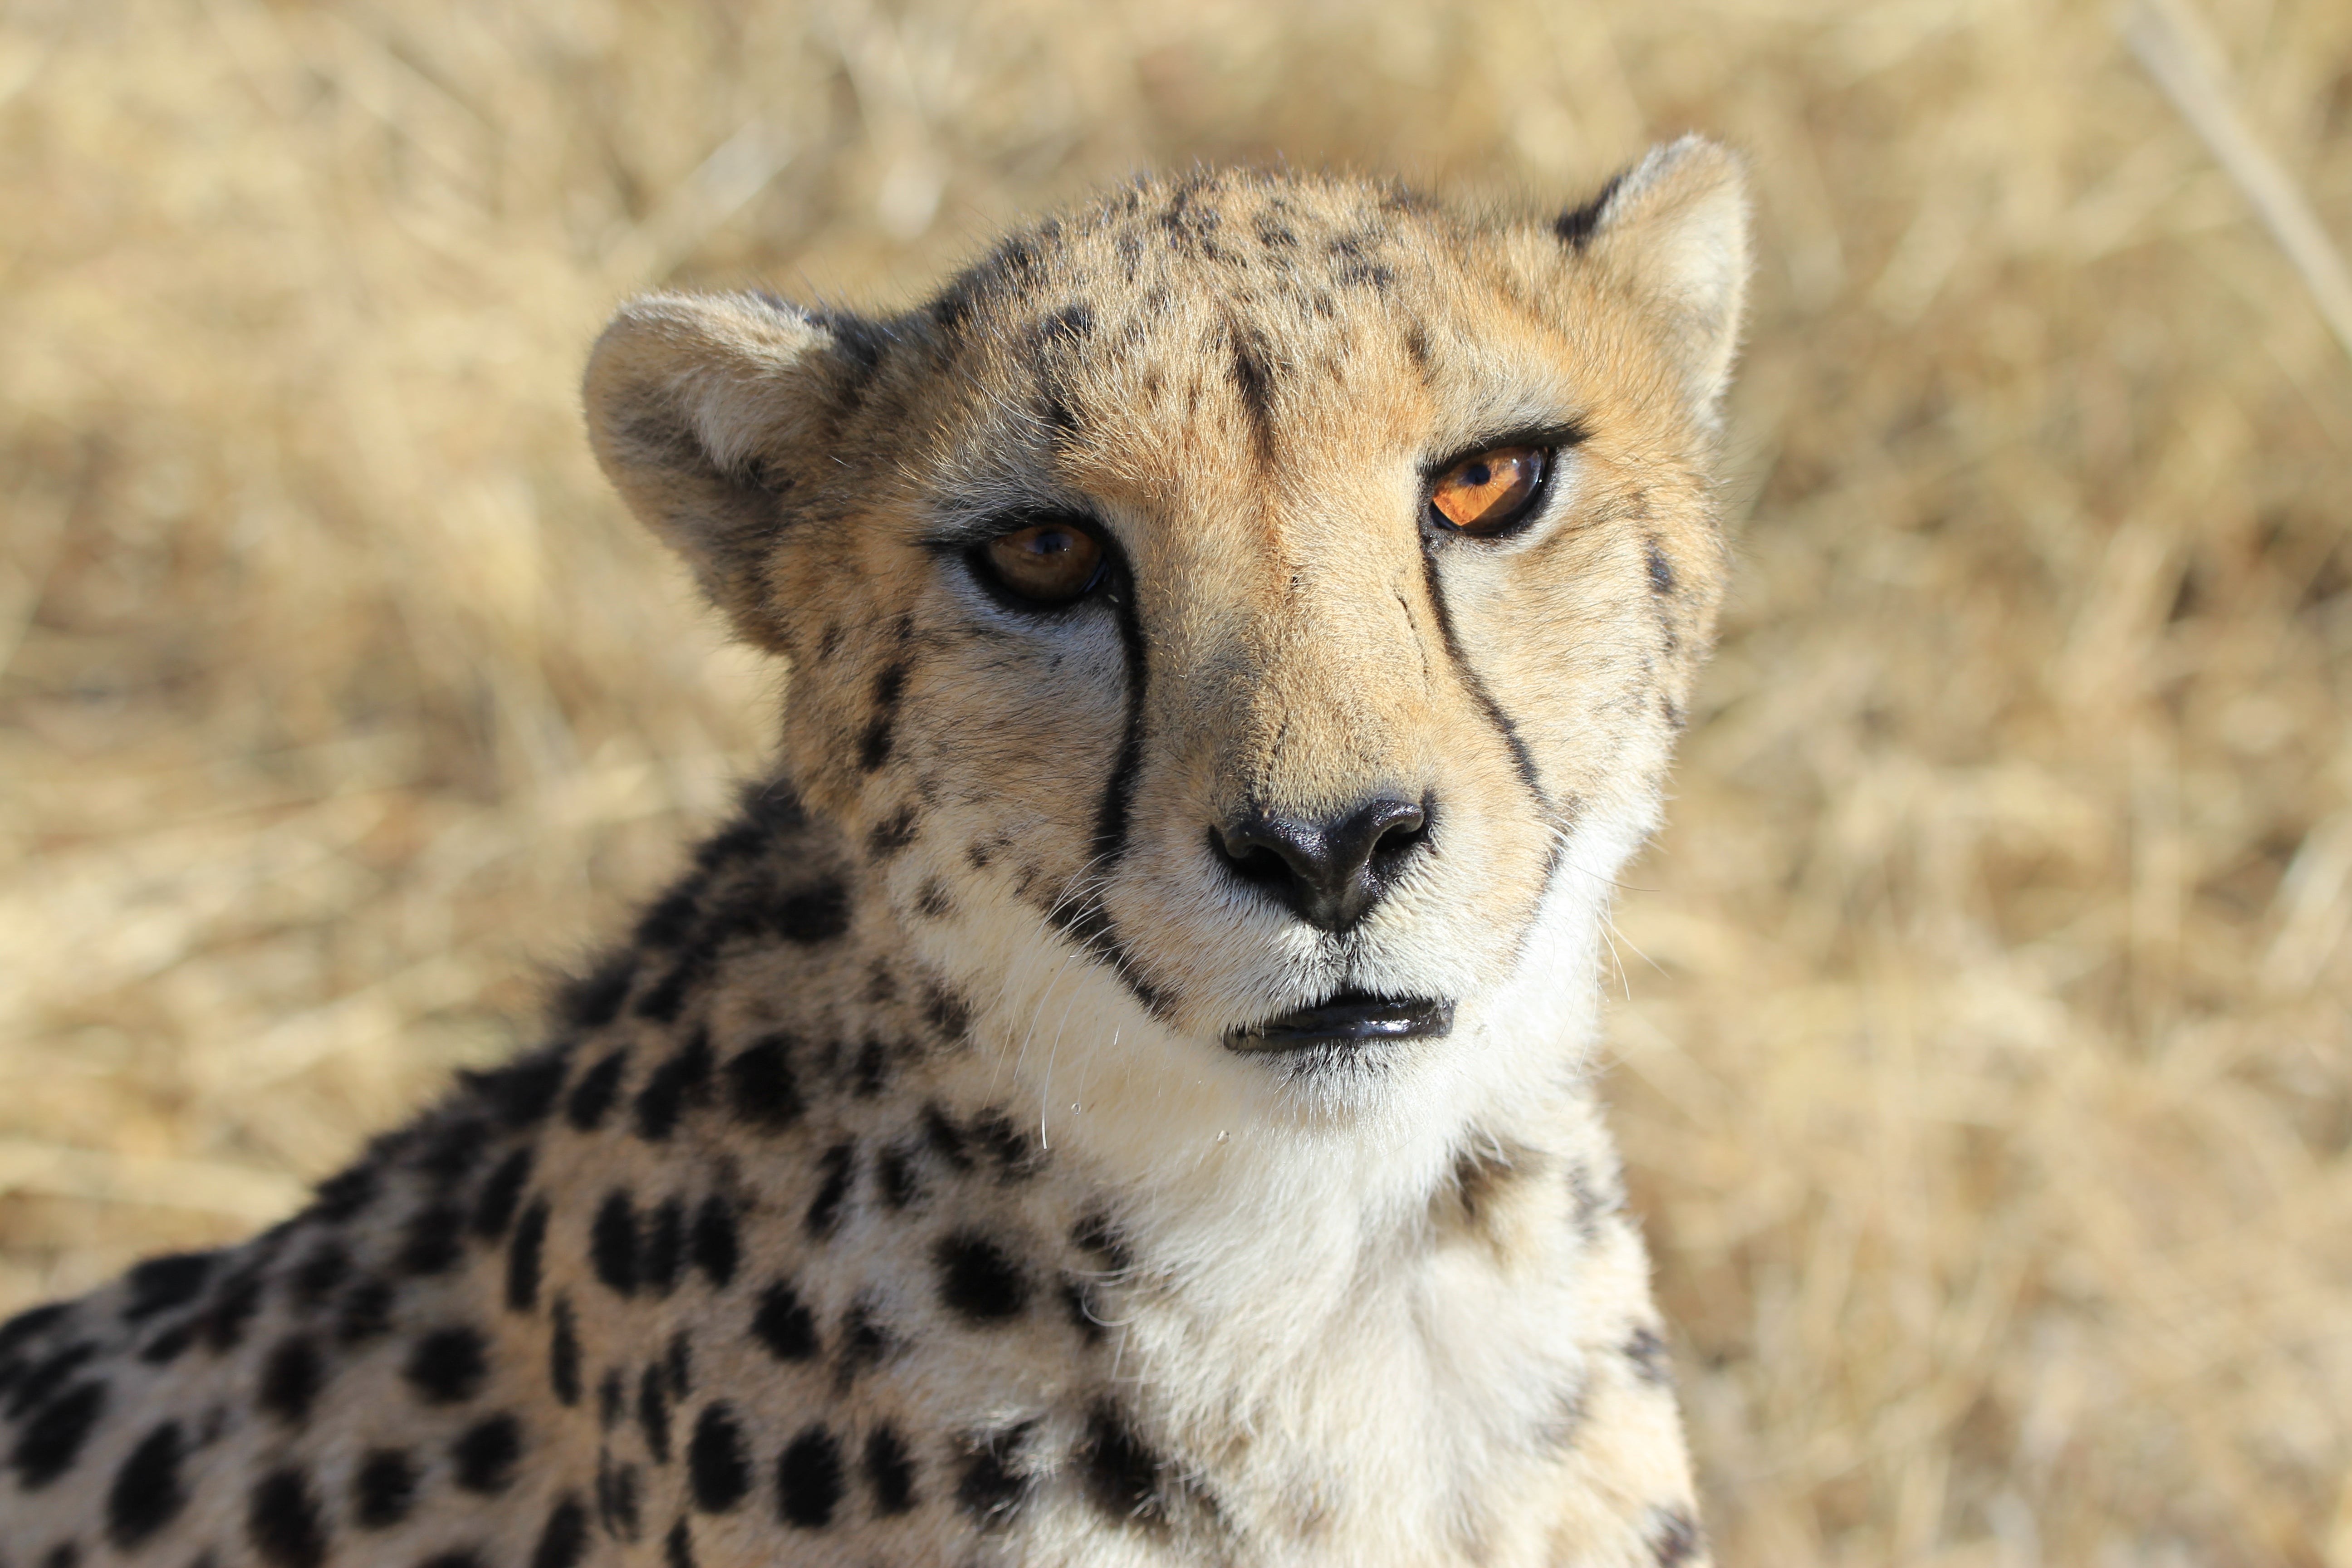 Cheetahs were brought by India’s government to revive the country’s population of the world’s fastest land animal